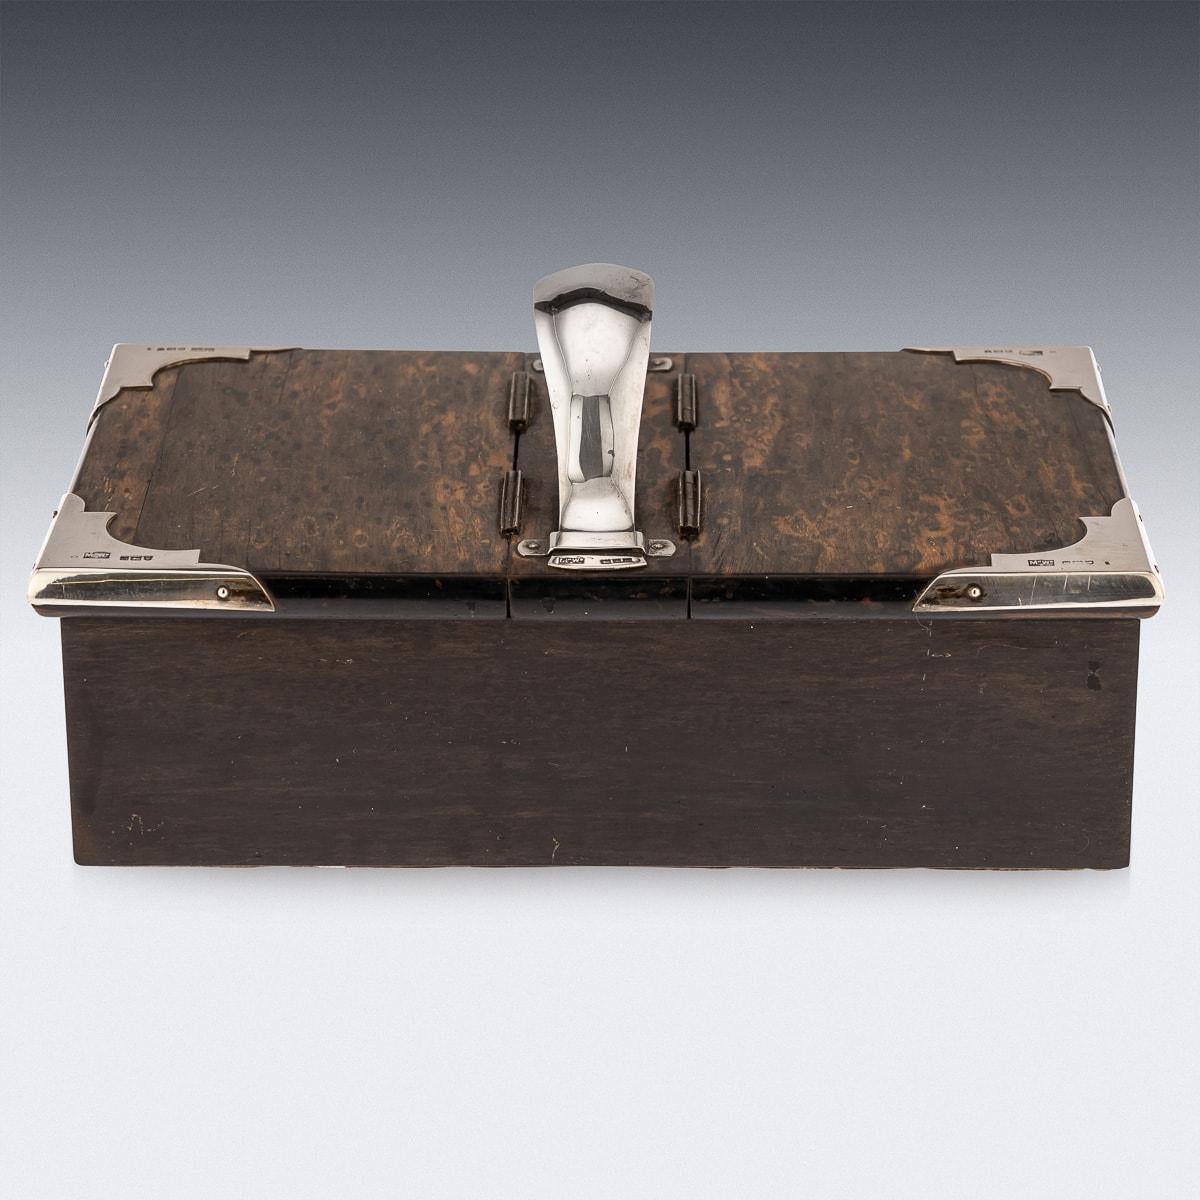 Antique early 20th Century Edwardian coromandel wood smoker's box with solid silver mounts. This quite stunning box is made from the highly prized calamander or coromandel wood, native to india and Sri Lanka. Already rare due to its extinction, it